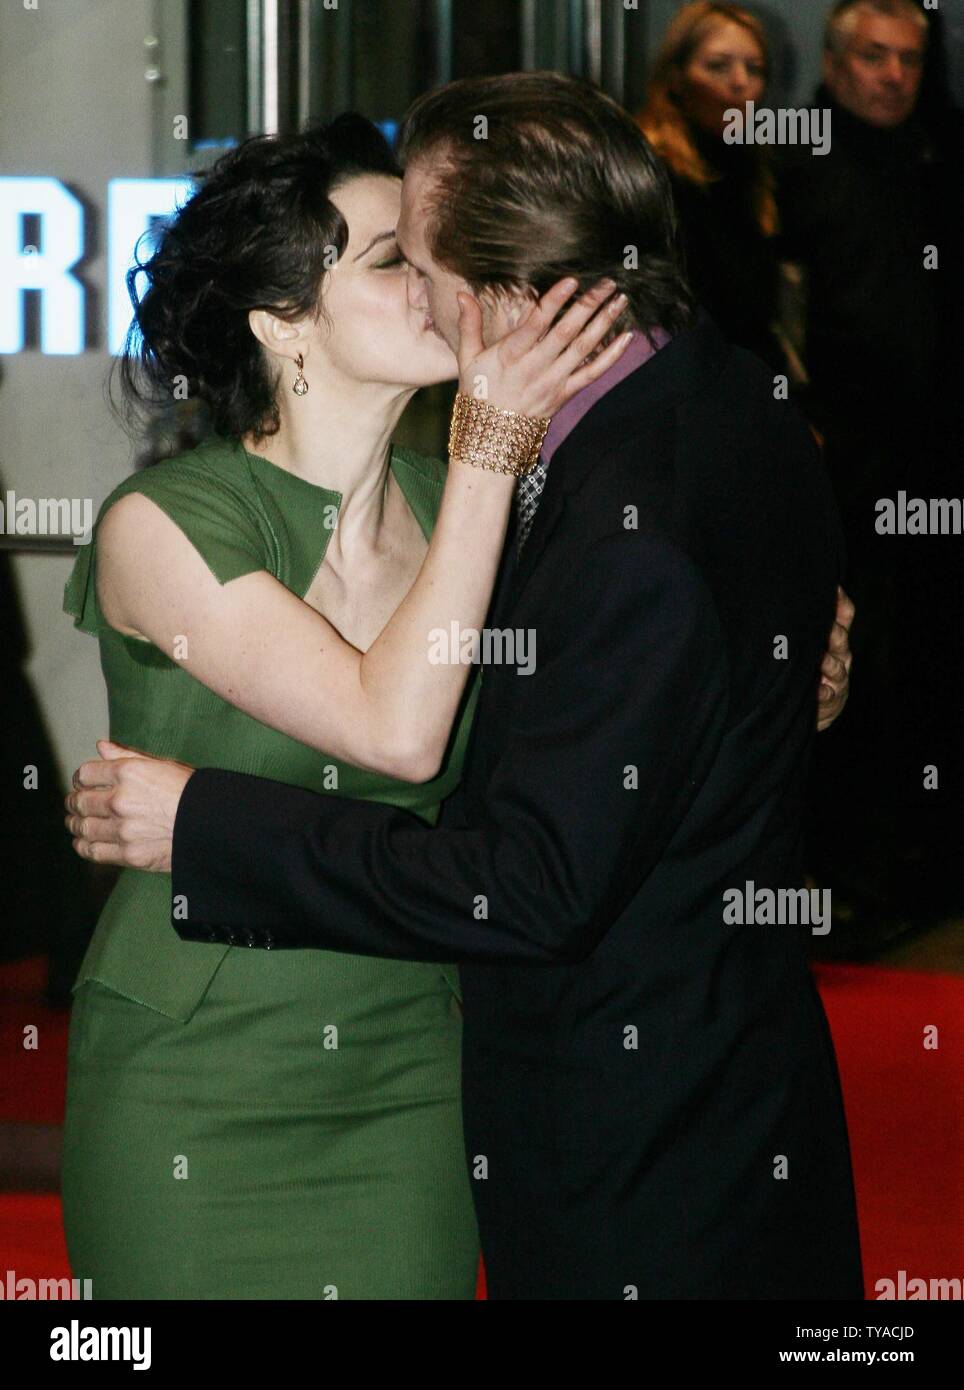 British actress Rachel Weisz (L) kisses her co-star Ralph Fiennes at the  opening of their new film "The Constant Gardener" which launched the London  Film festival 2005 in London on October 19